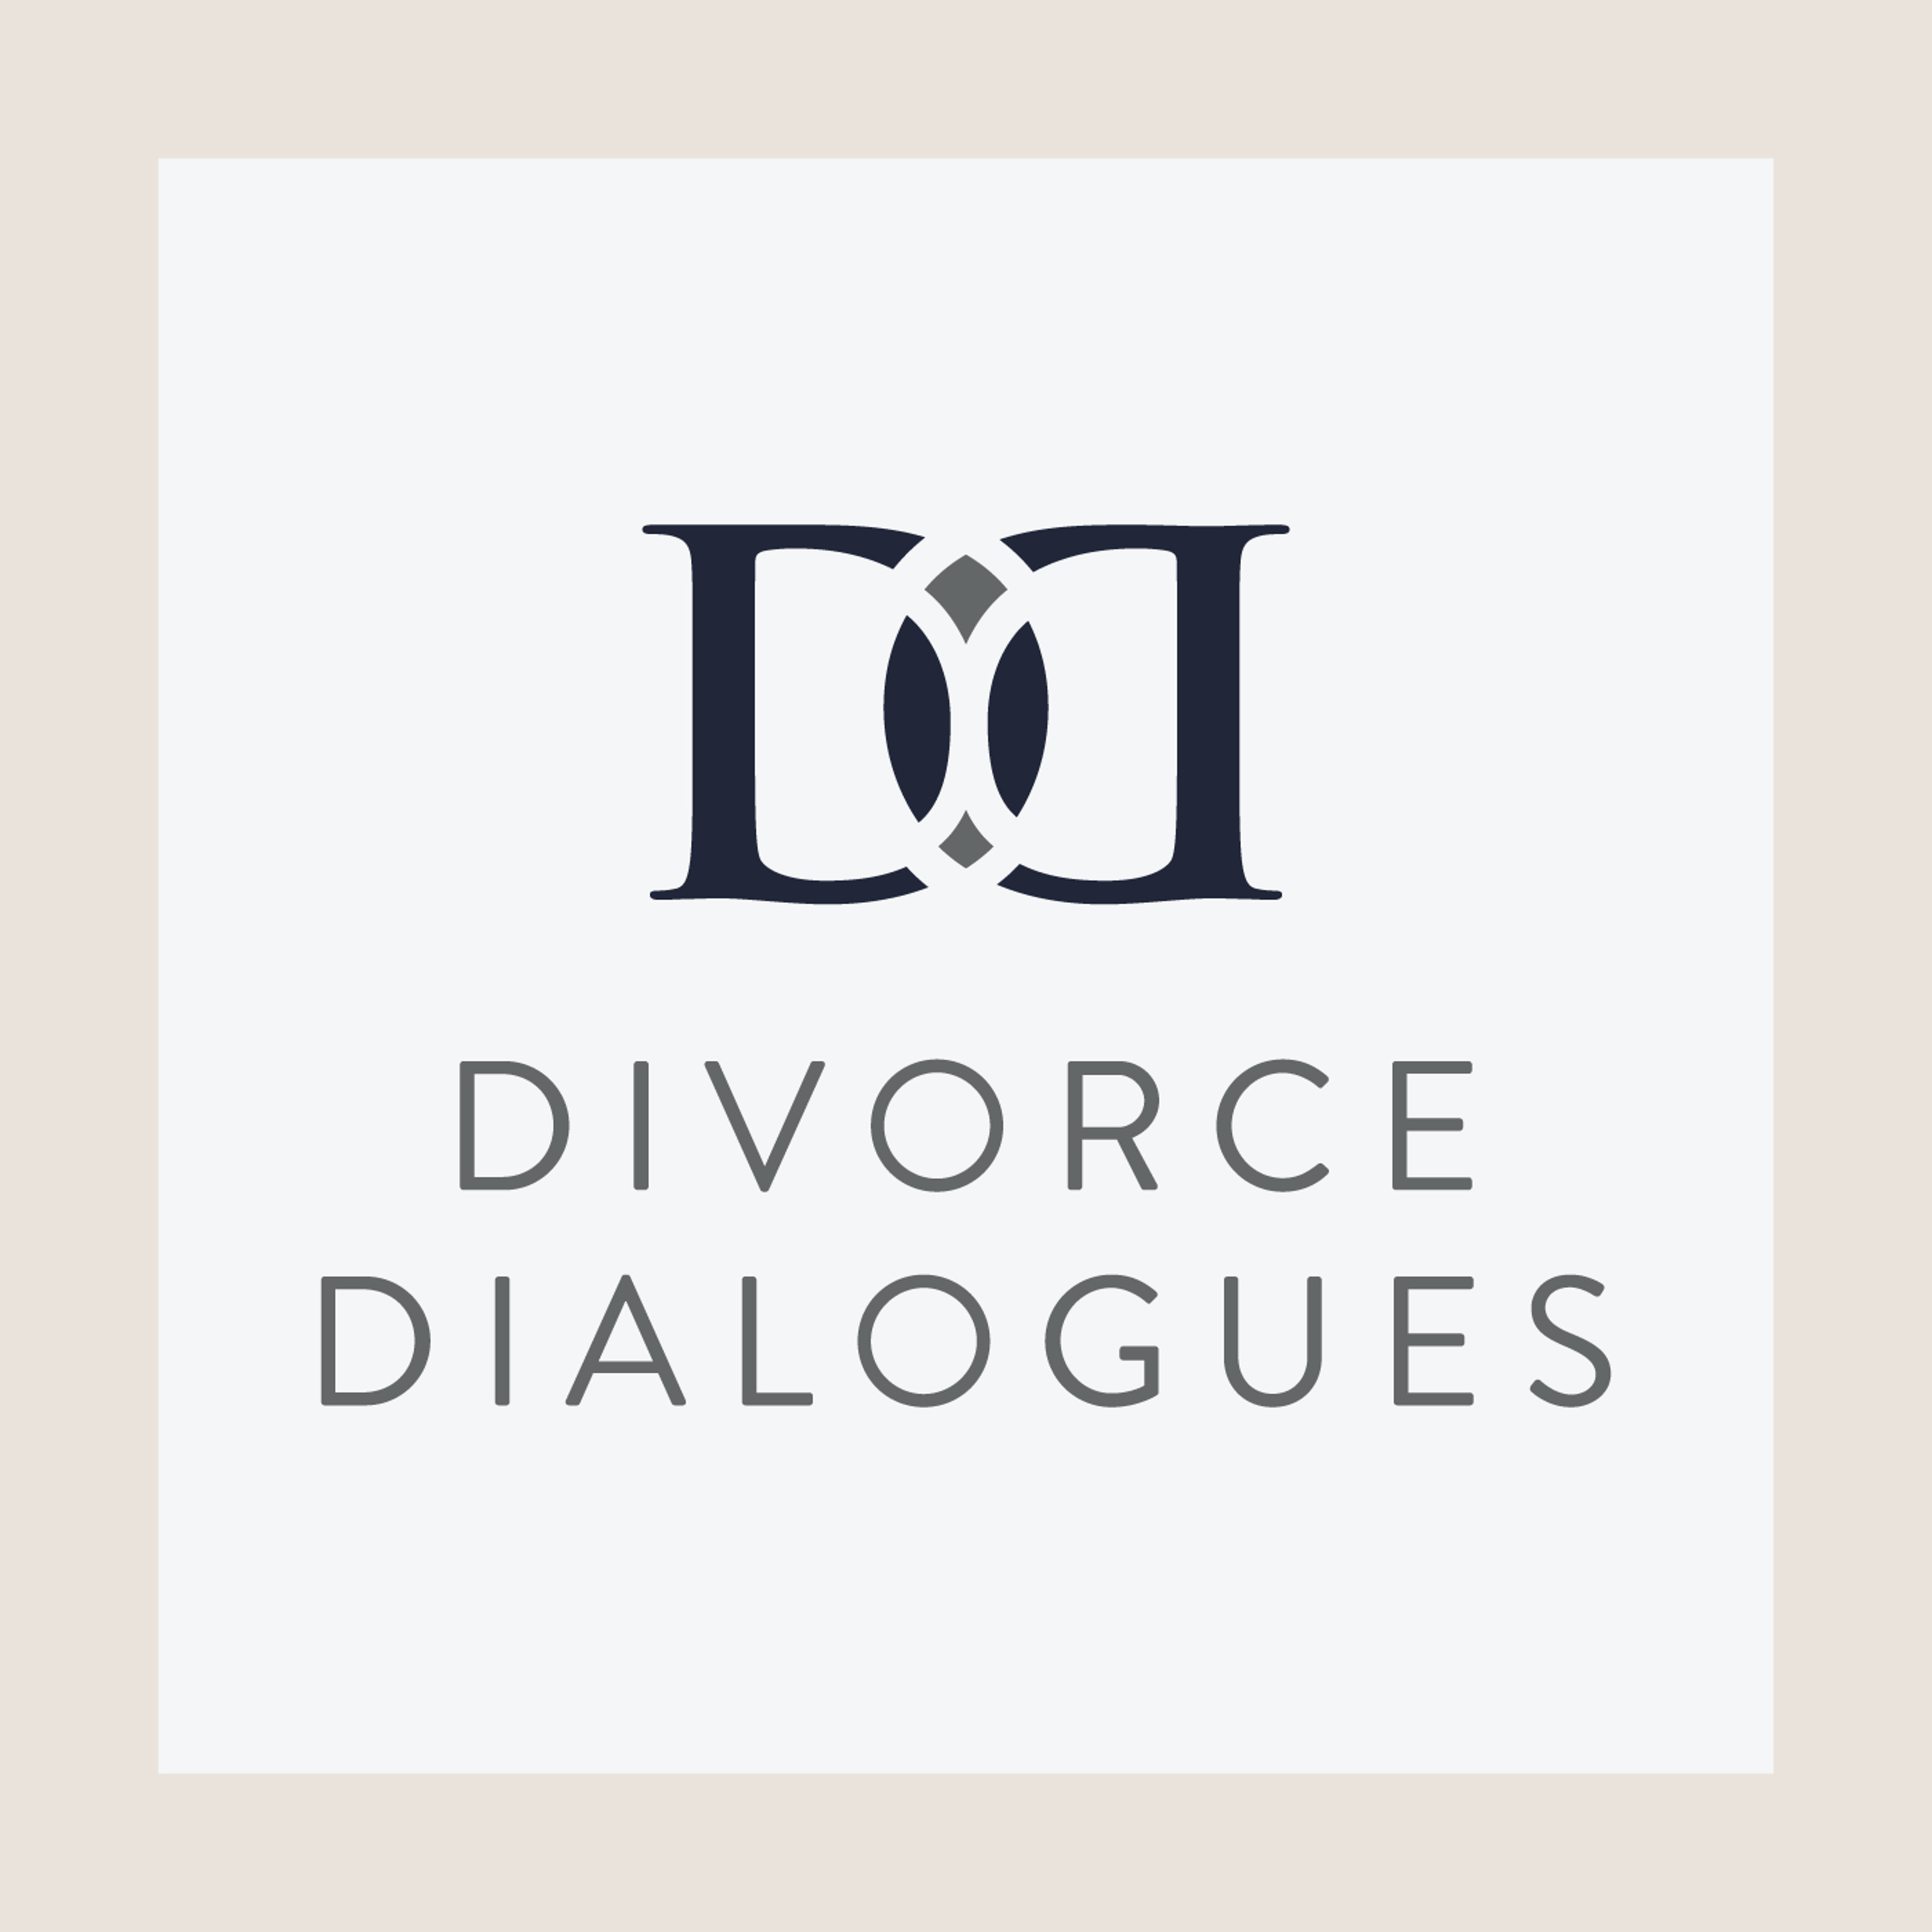 Divorce Dialogues - What You Need to Know About Dating After Divorce with Alyssa Dineen